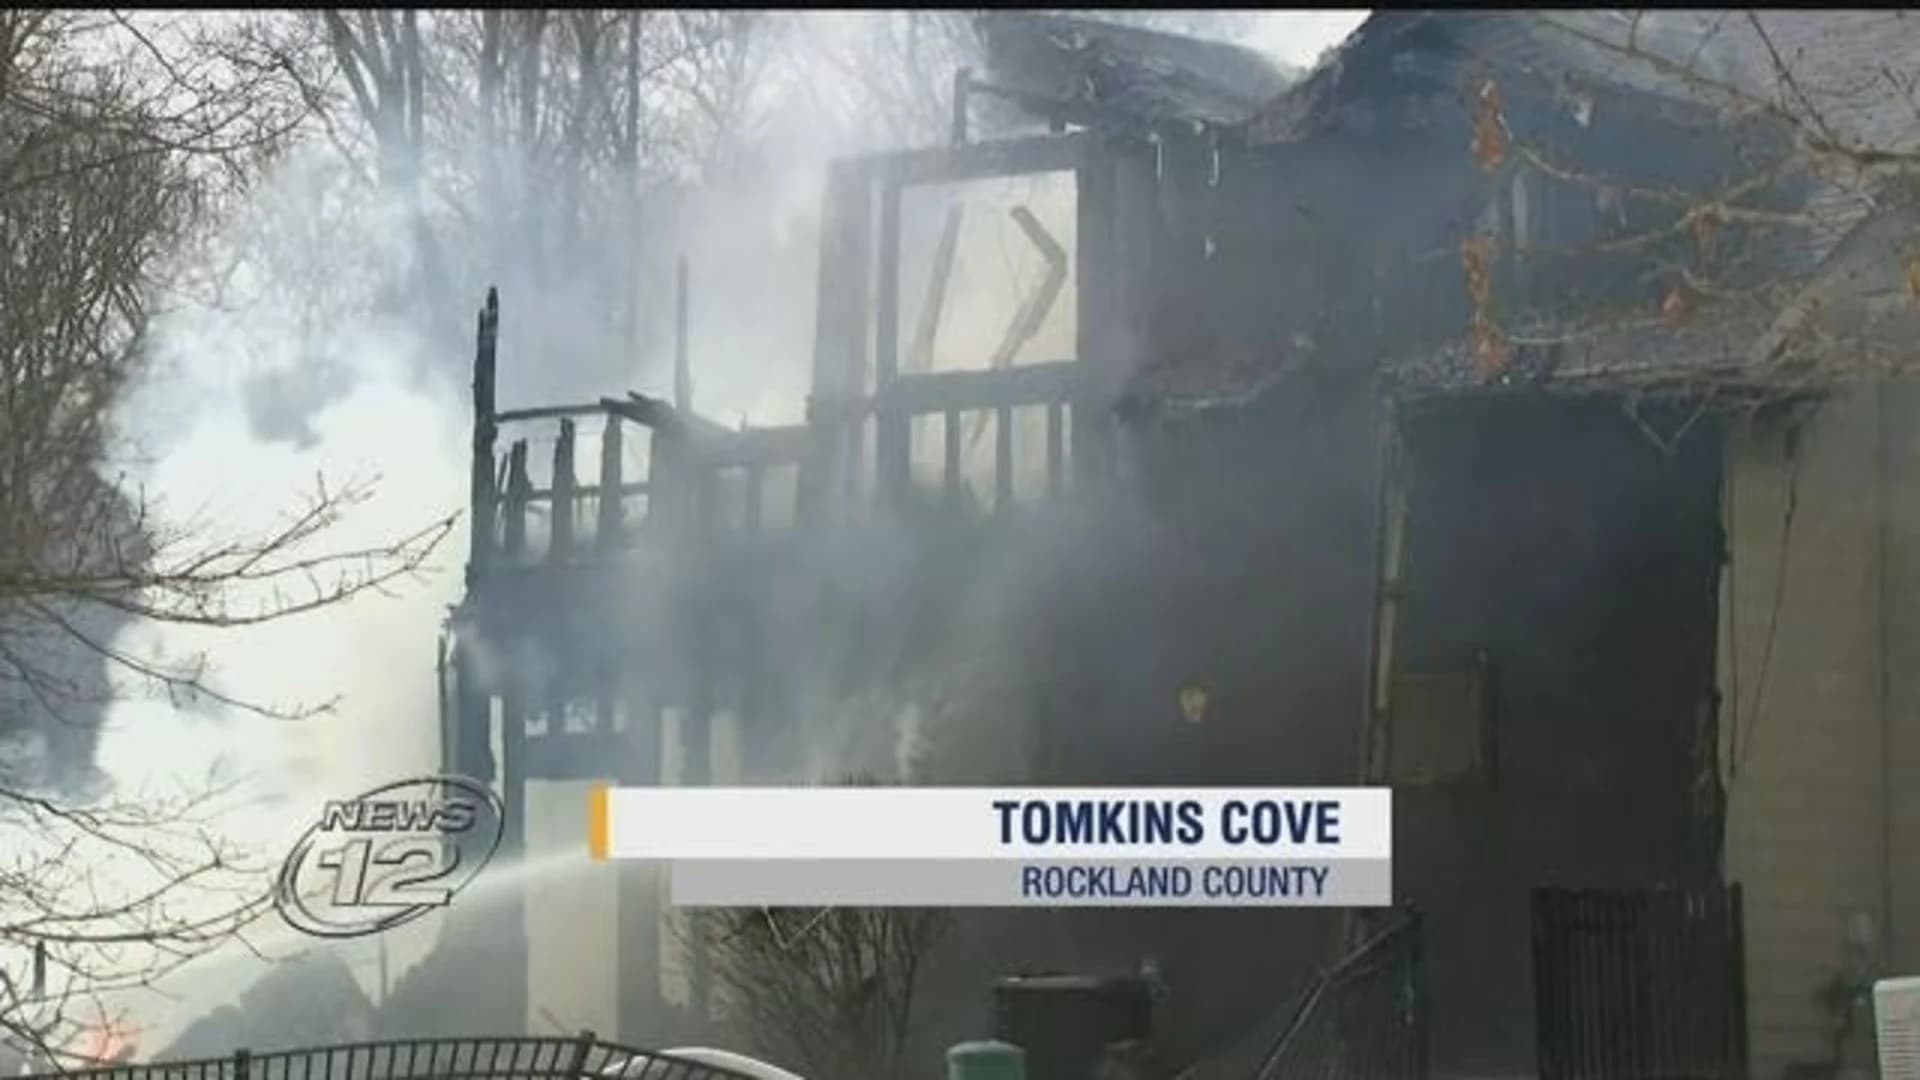 Fire destroys home in Tomkins Cove